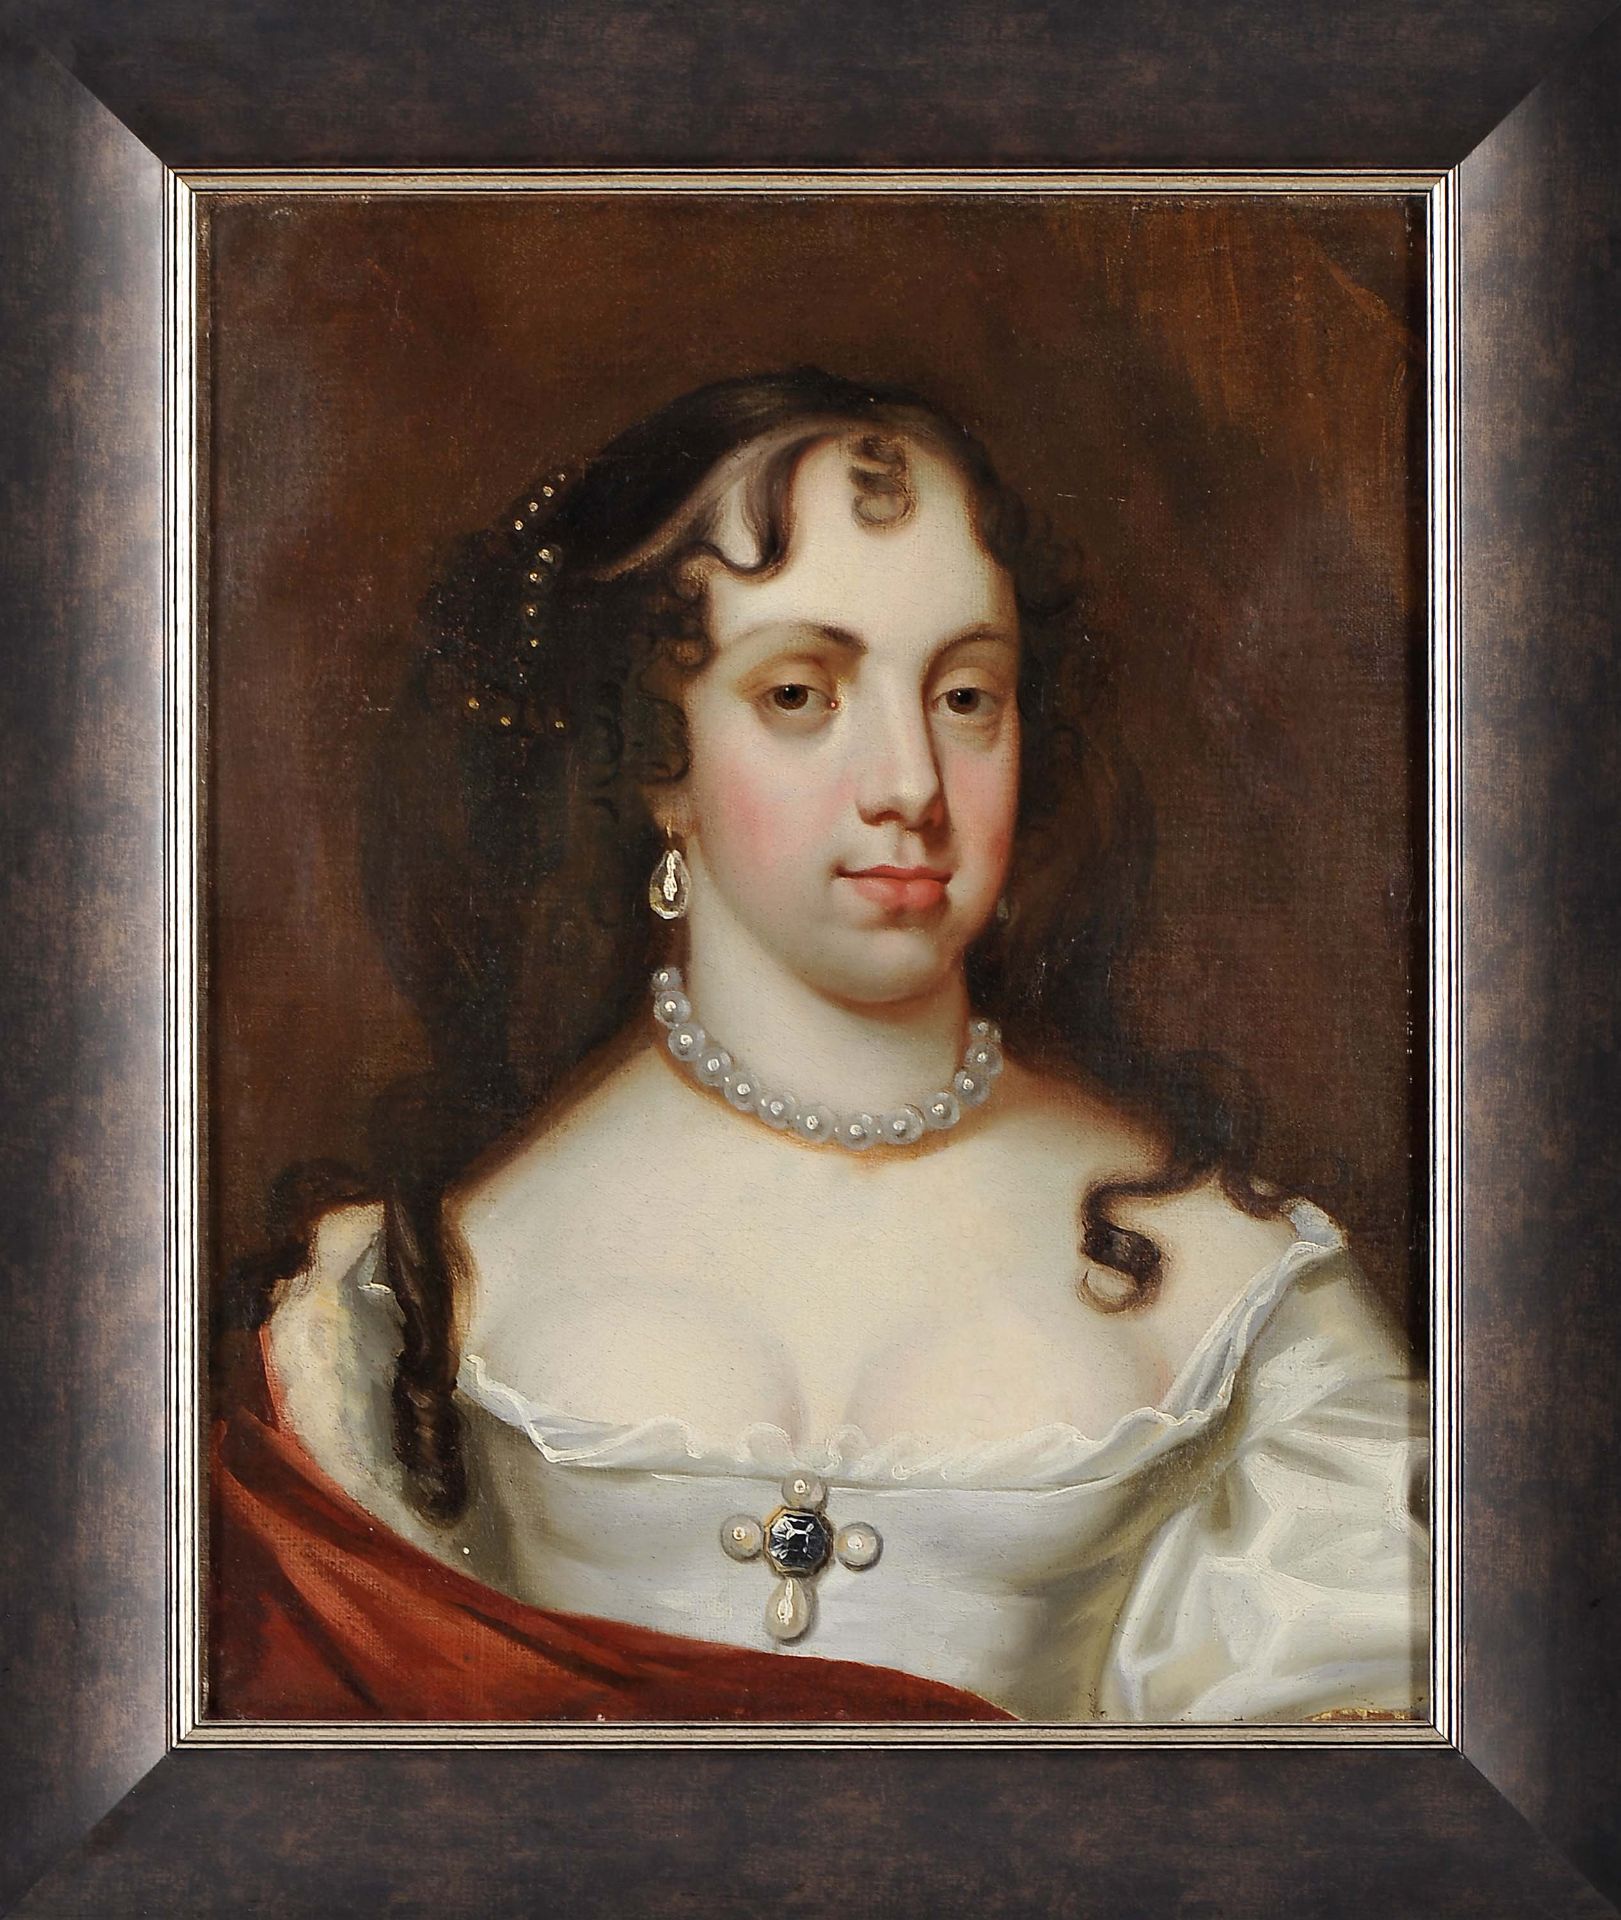 Portrait of Catherine of Braganza (1638-1705), Infanta of Portugal and Queen of England